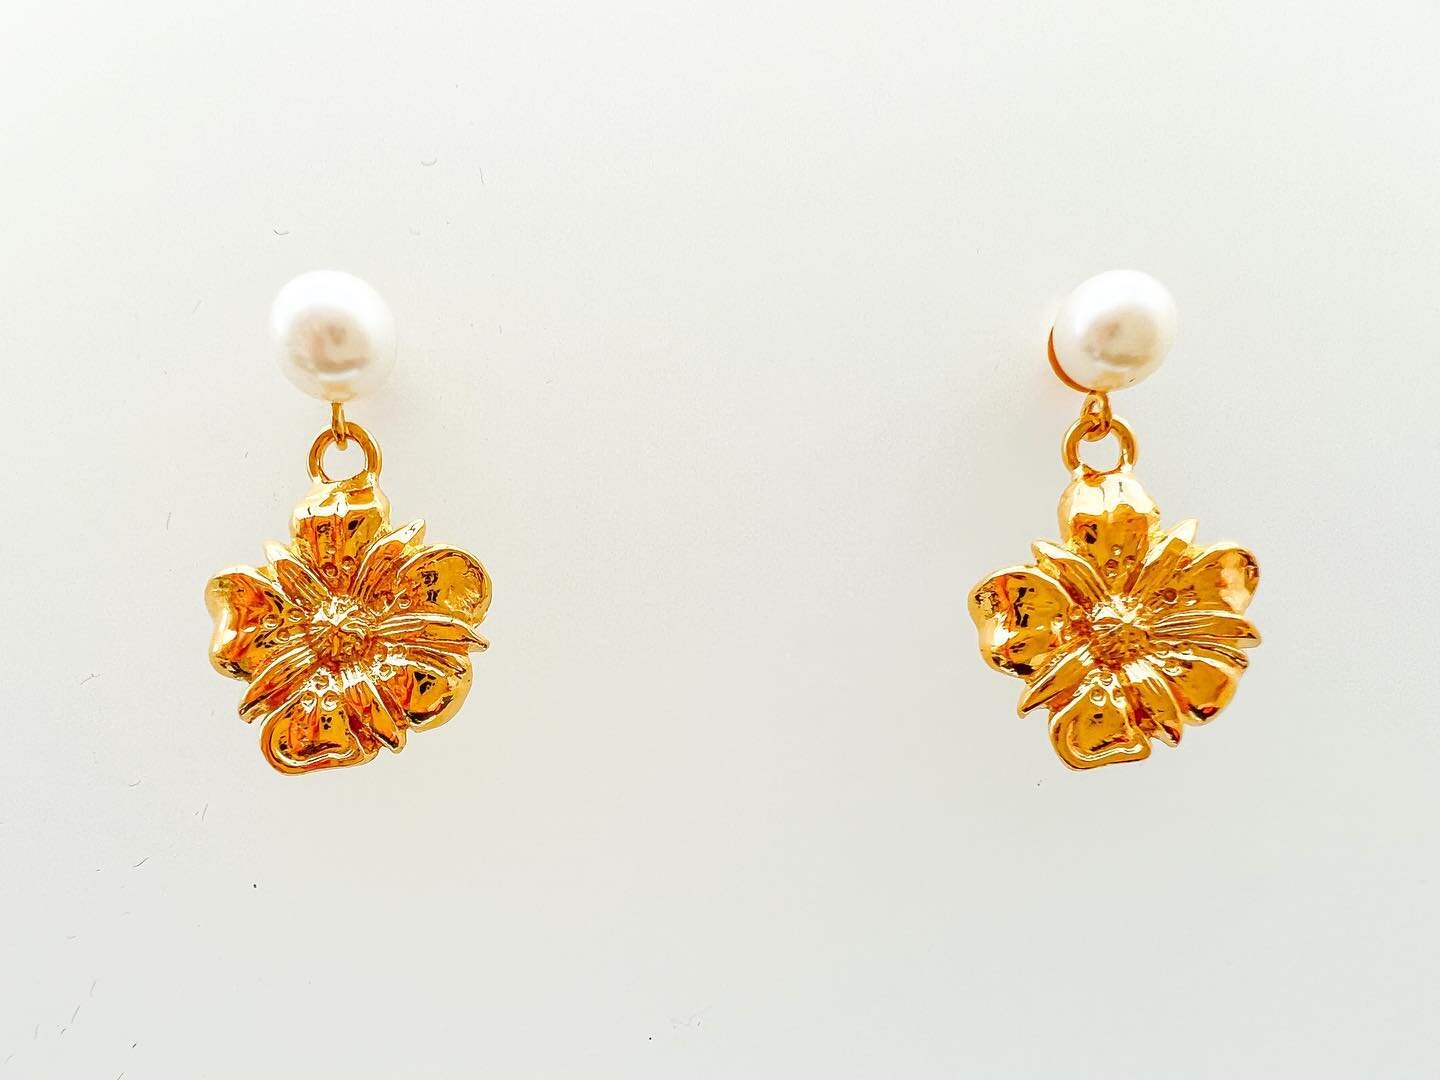 Strawberry flower earrings in gold plated or 9 carat gold with freshwater pearls. Originally hand-carved in wax (swipe to see wax work), you can see the trace of my hand in every jewel. Order yours now at www.josephinedestael.com #jewellery #lostwaxc